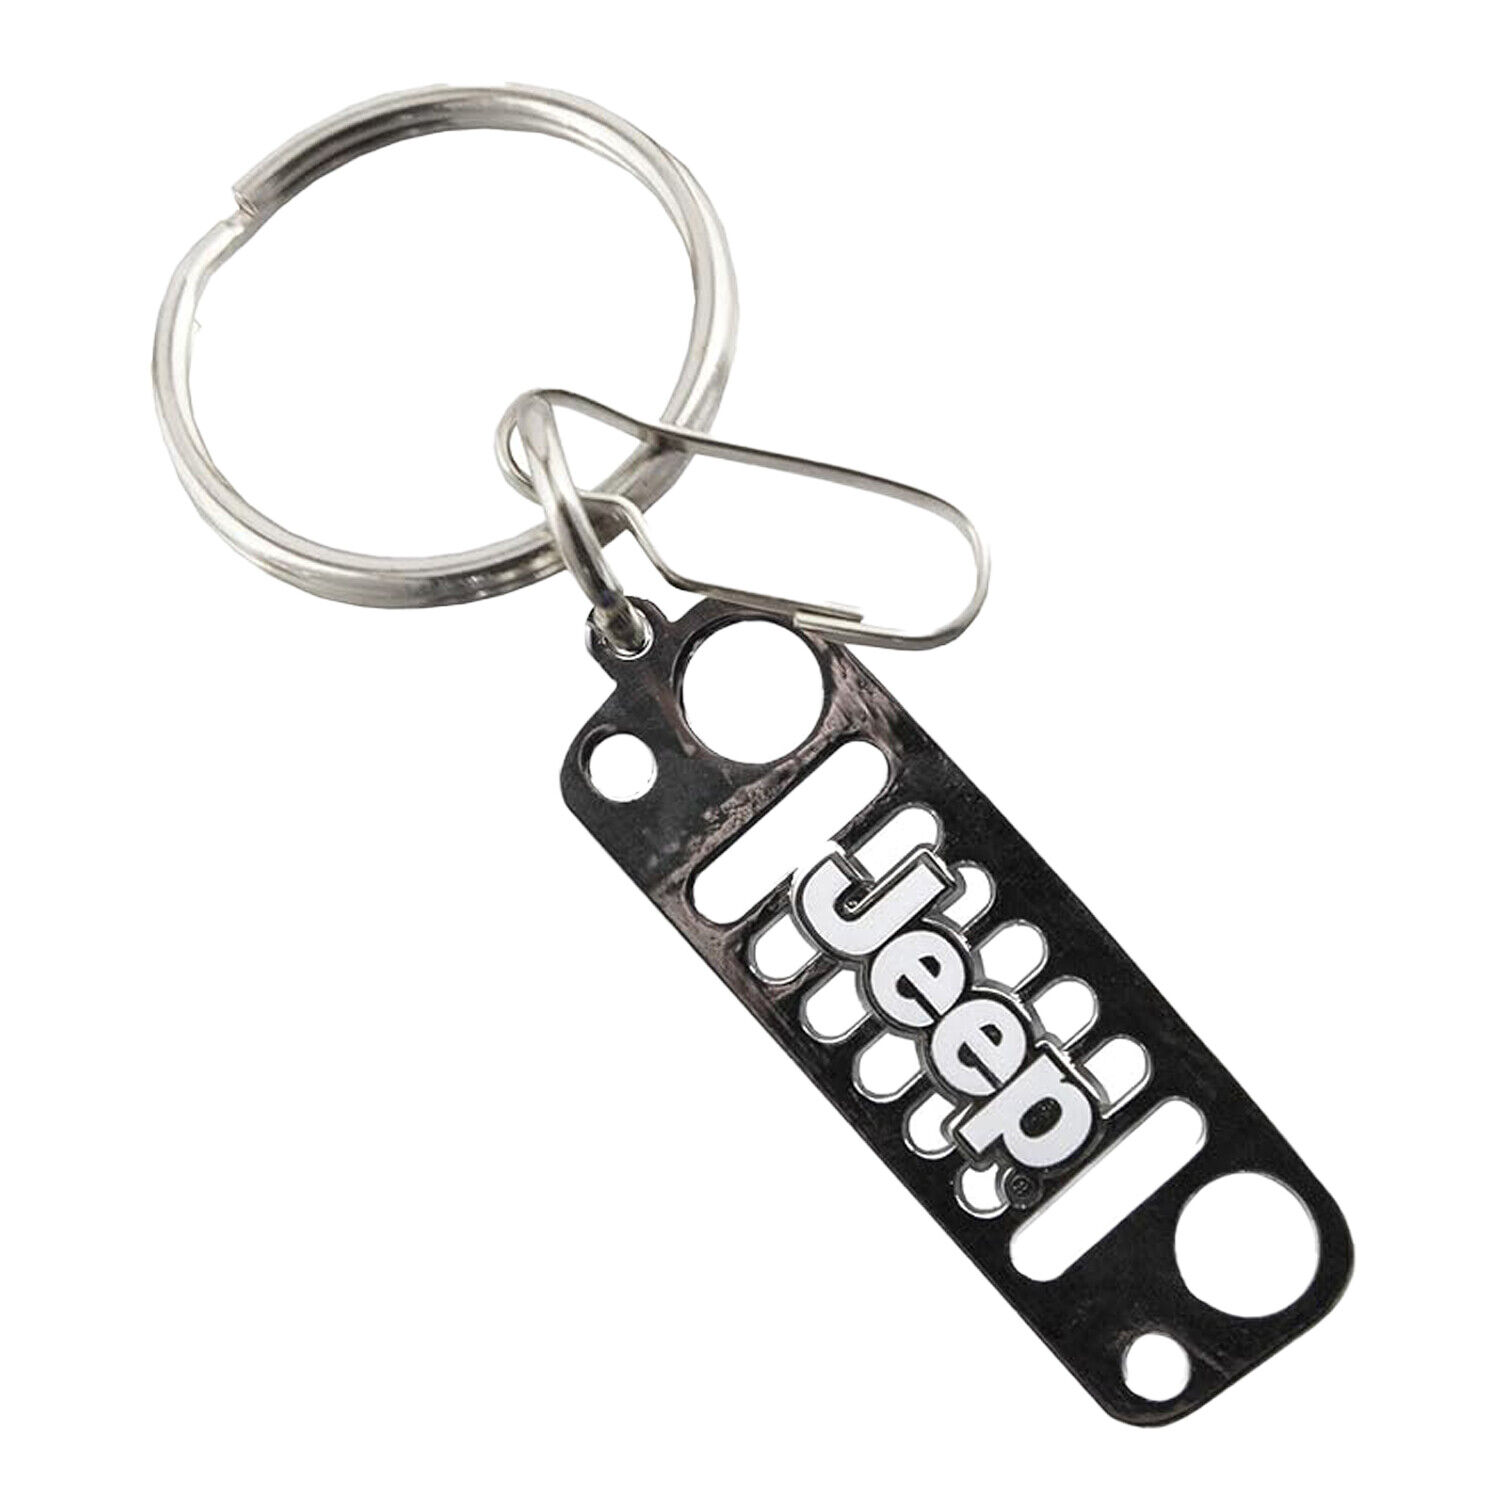 Plasticolor Jeep Keychain with Metal Grill Design